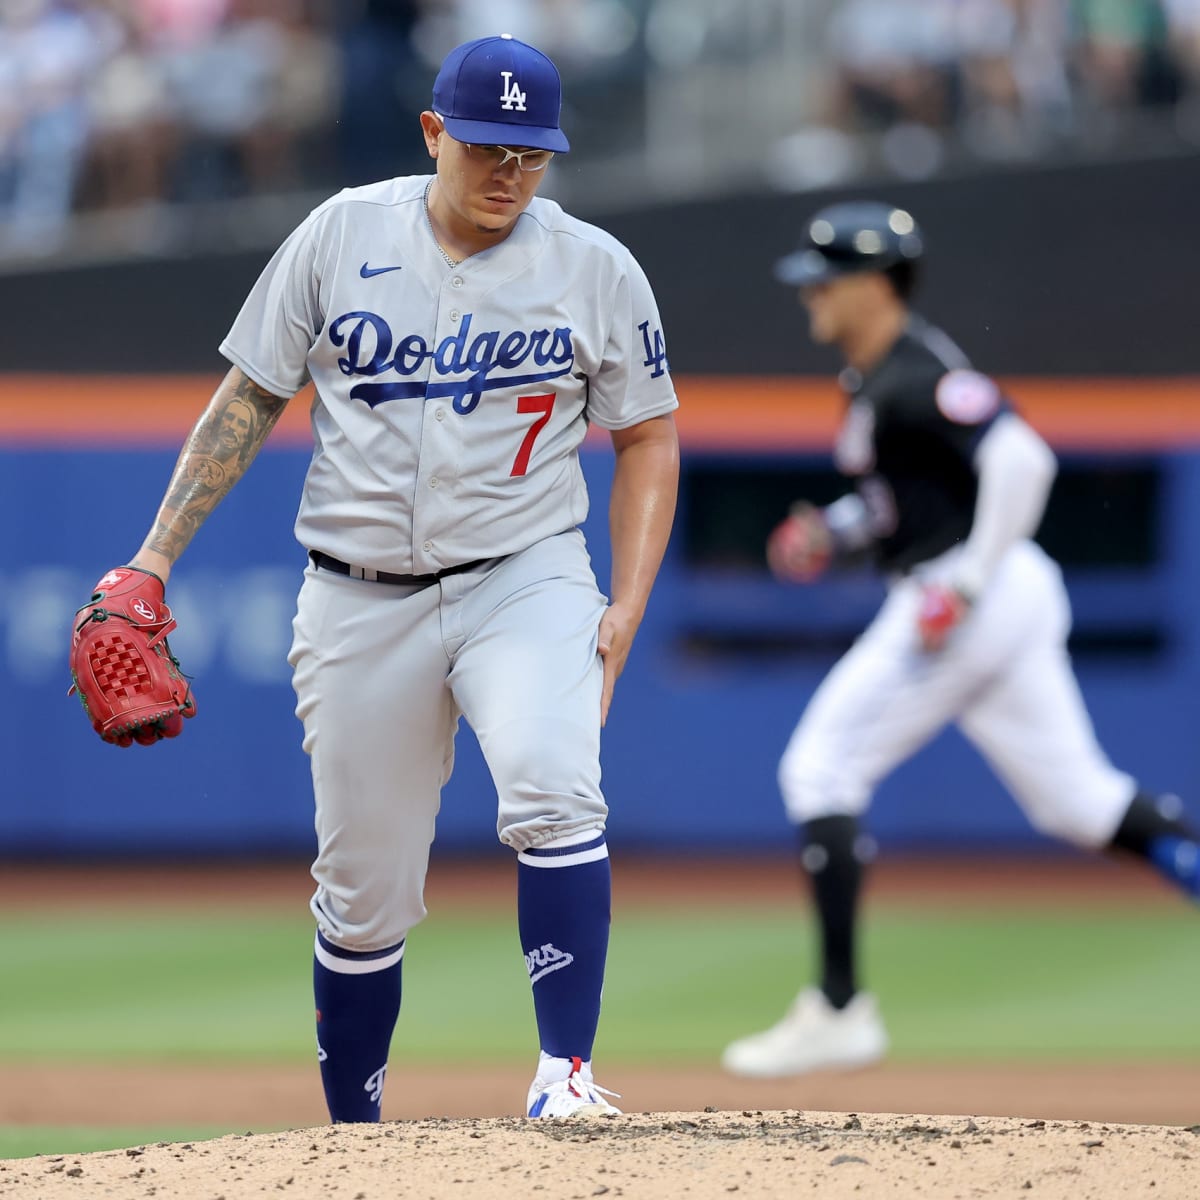 Julio Urias allowed one hit in six innings against the Mets